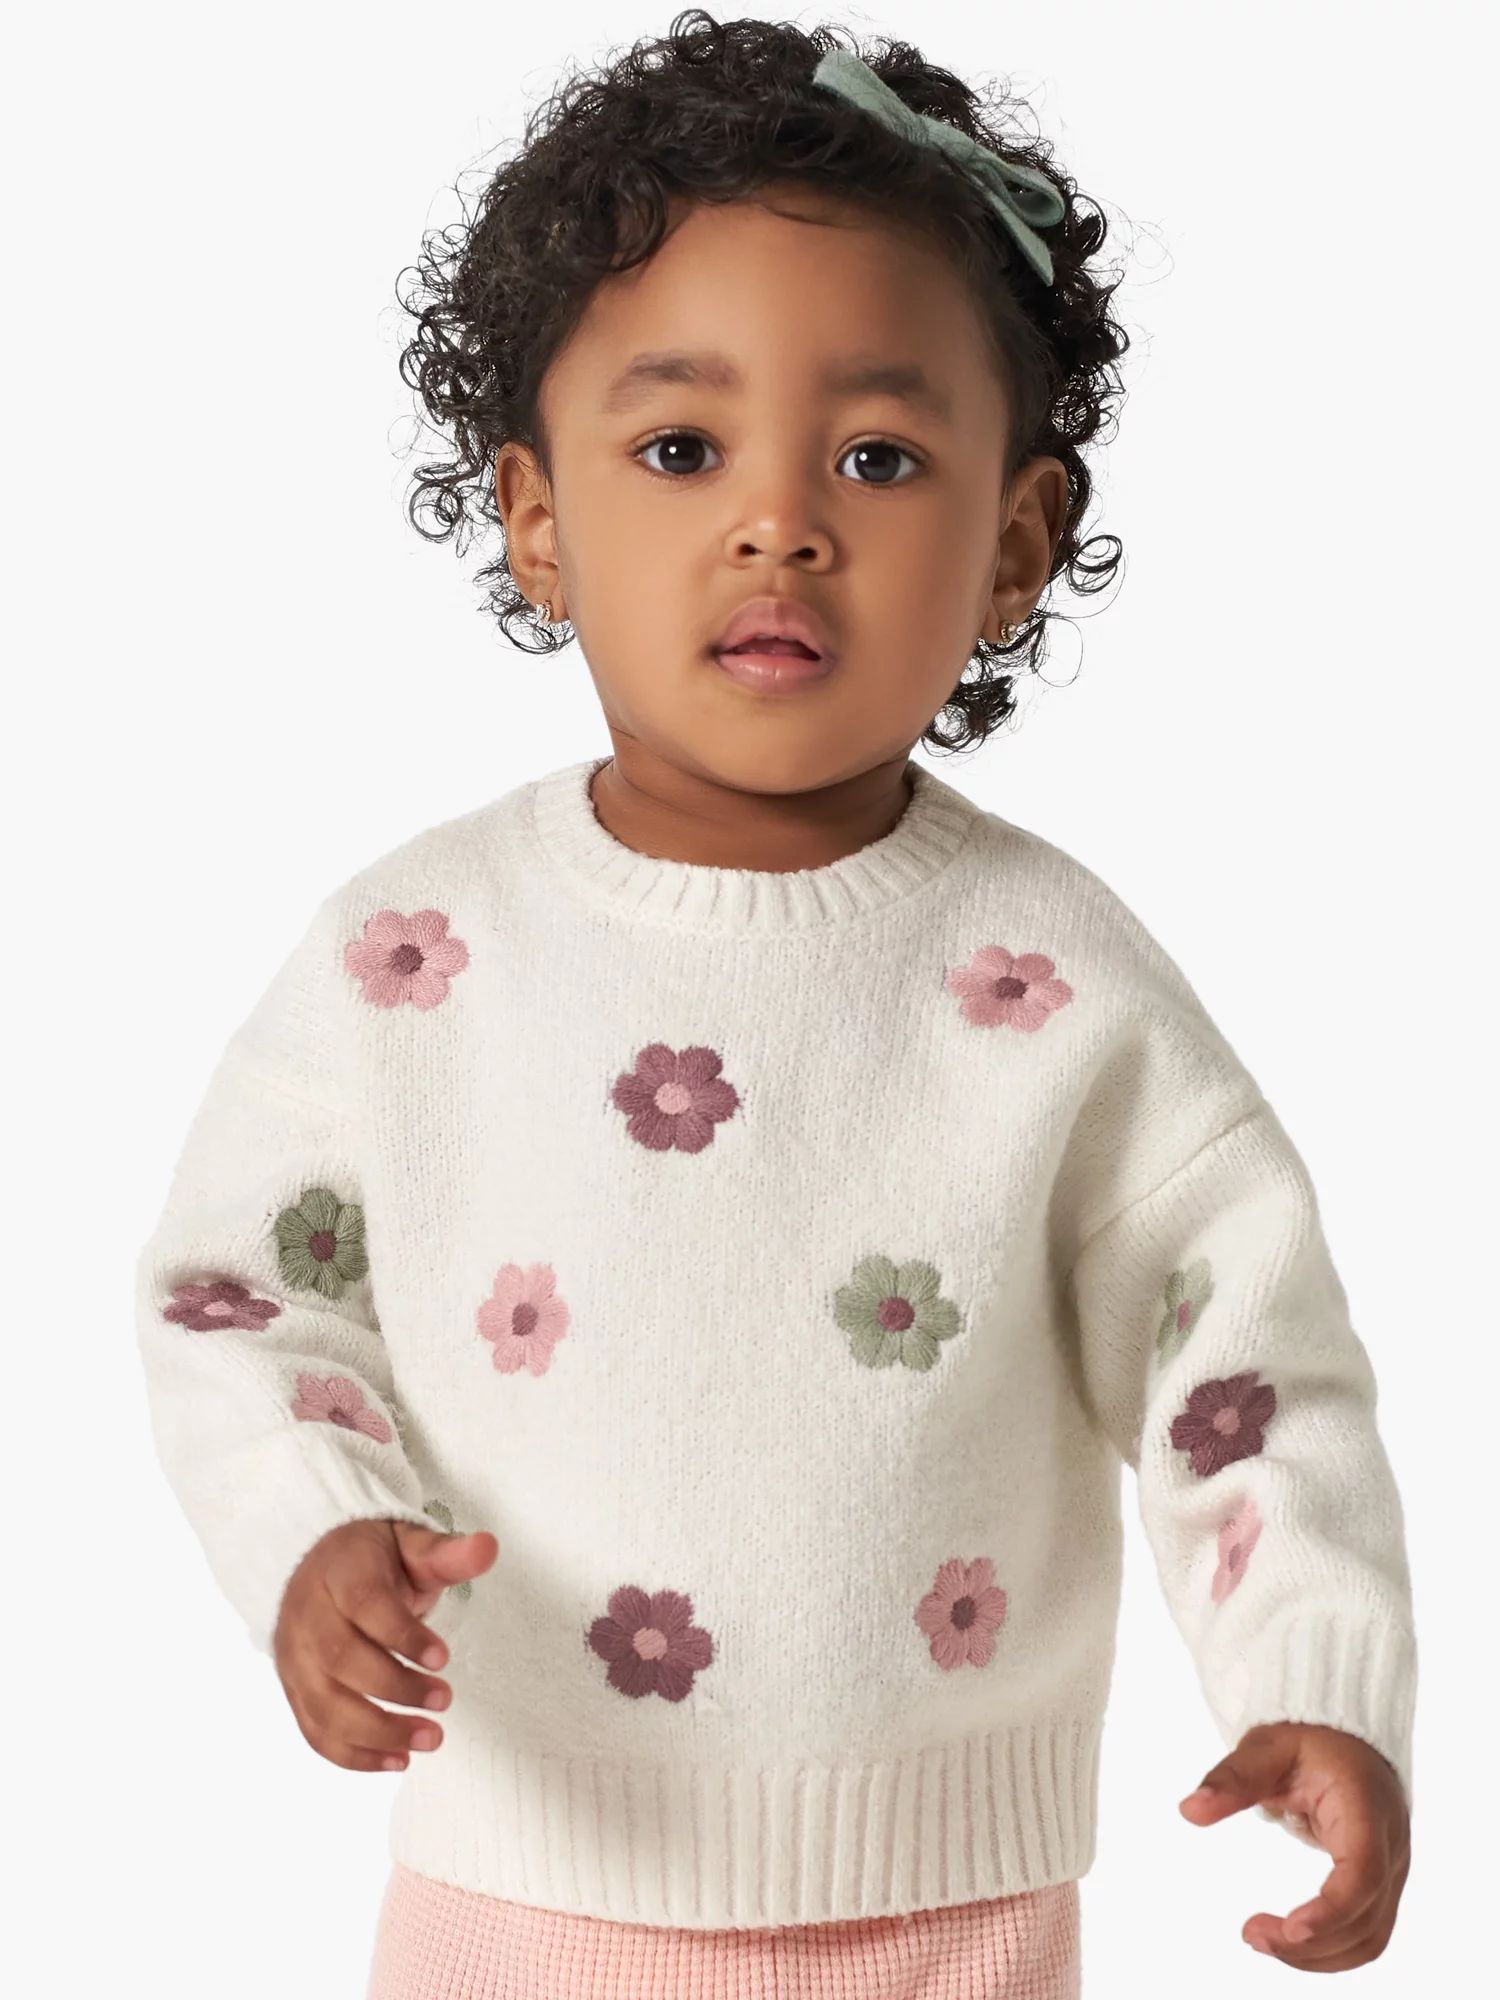 Modern Moments by Gerber Baby and Toddler Girl Sweater Knit Top, Sizes 12 Months -5T | Walmart (US)